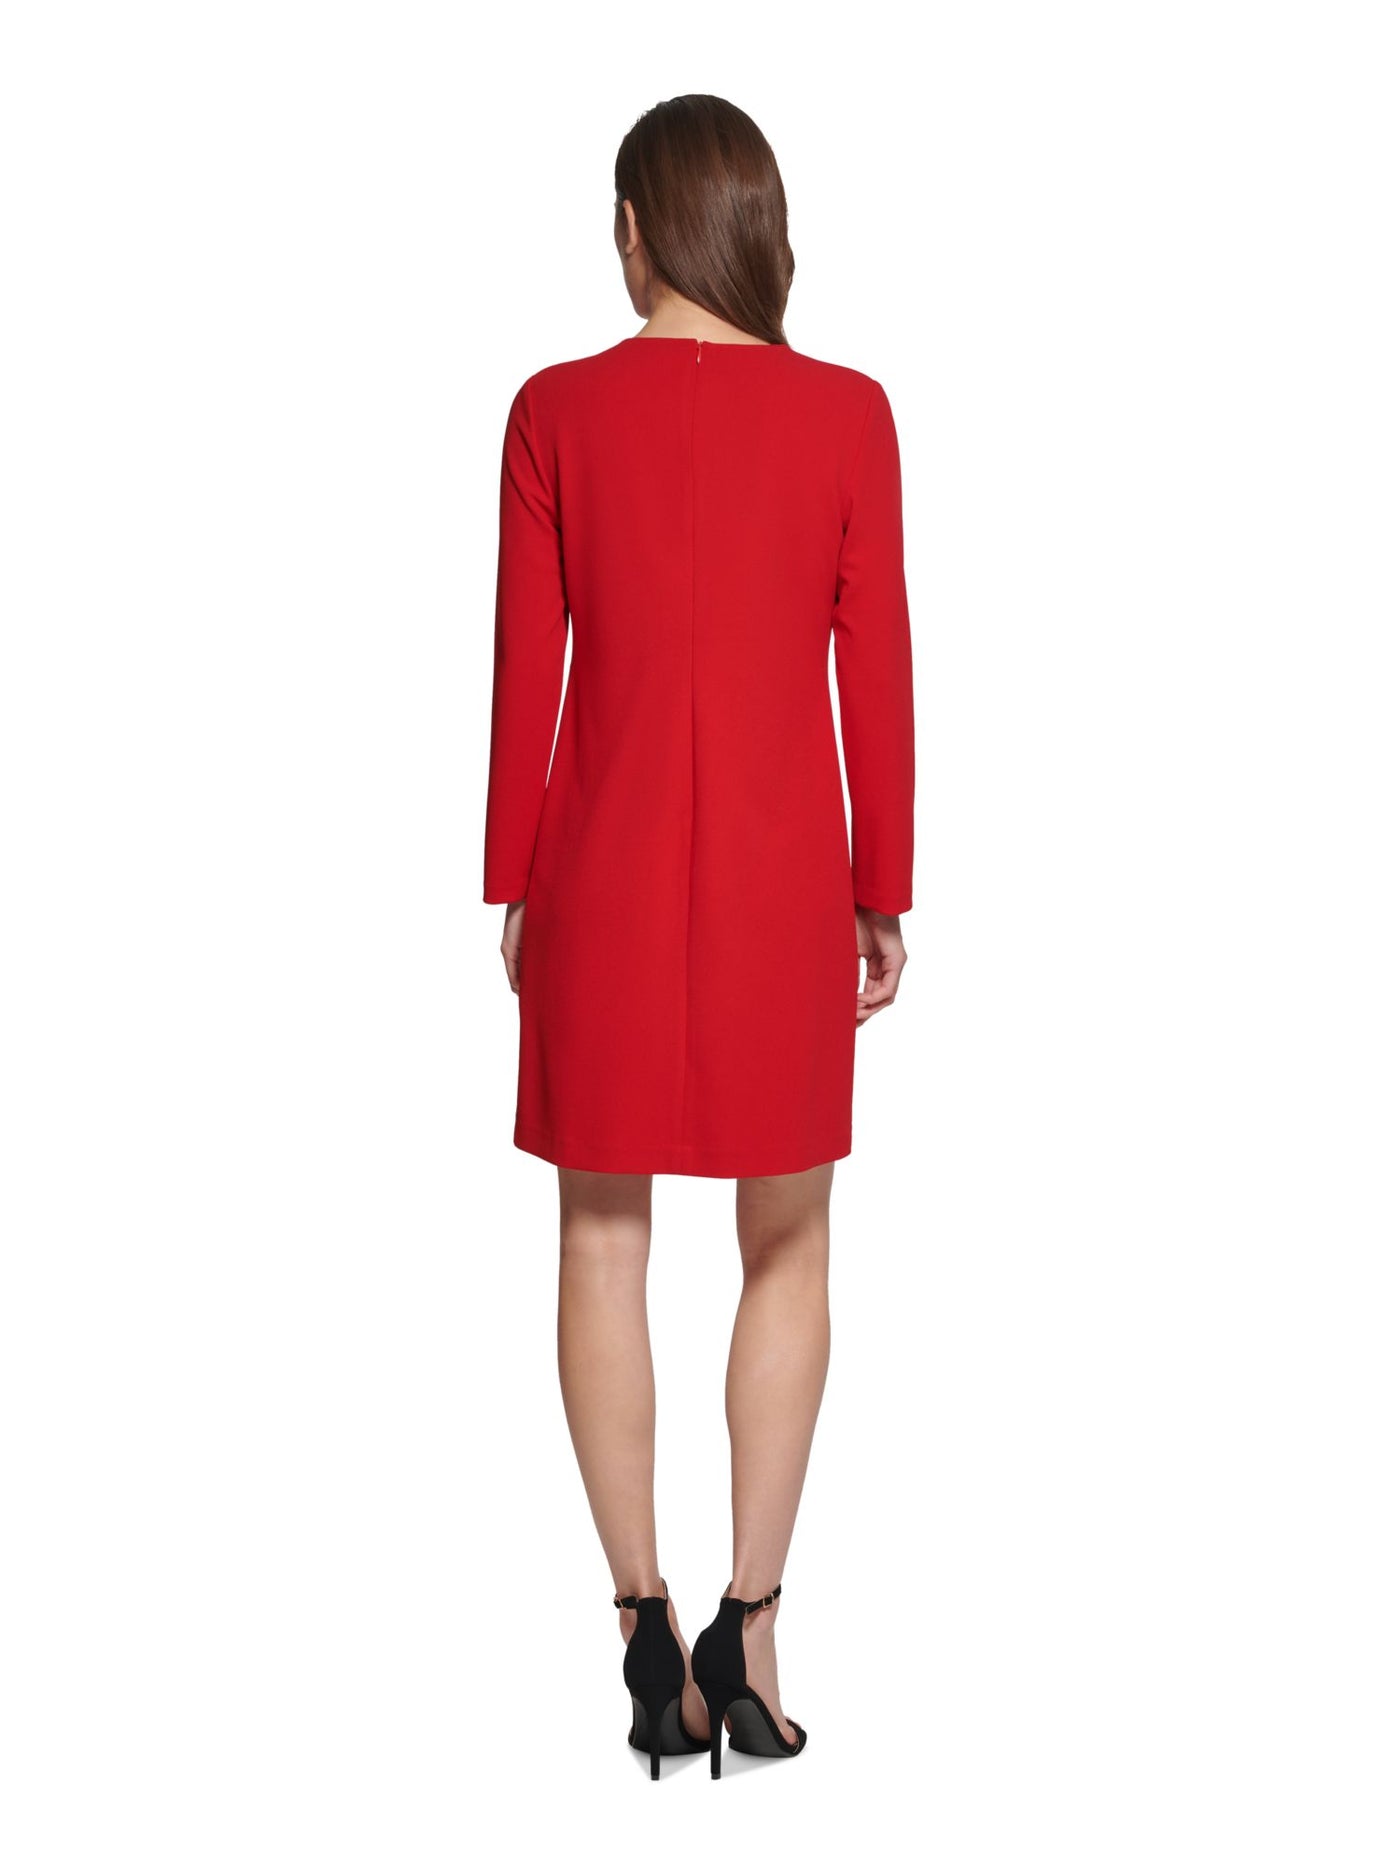 DKNY Womens Red Zippered Ruffled Unlined Darted Long Sleeve Round Neck Above The Knee Wear To Work Fit + Flare Dress 2